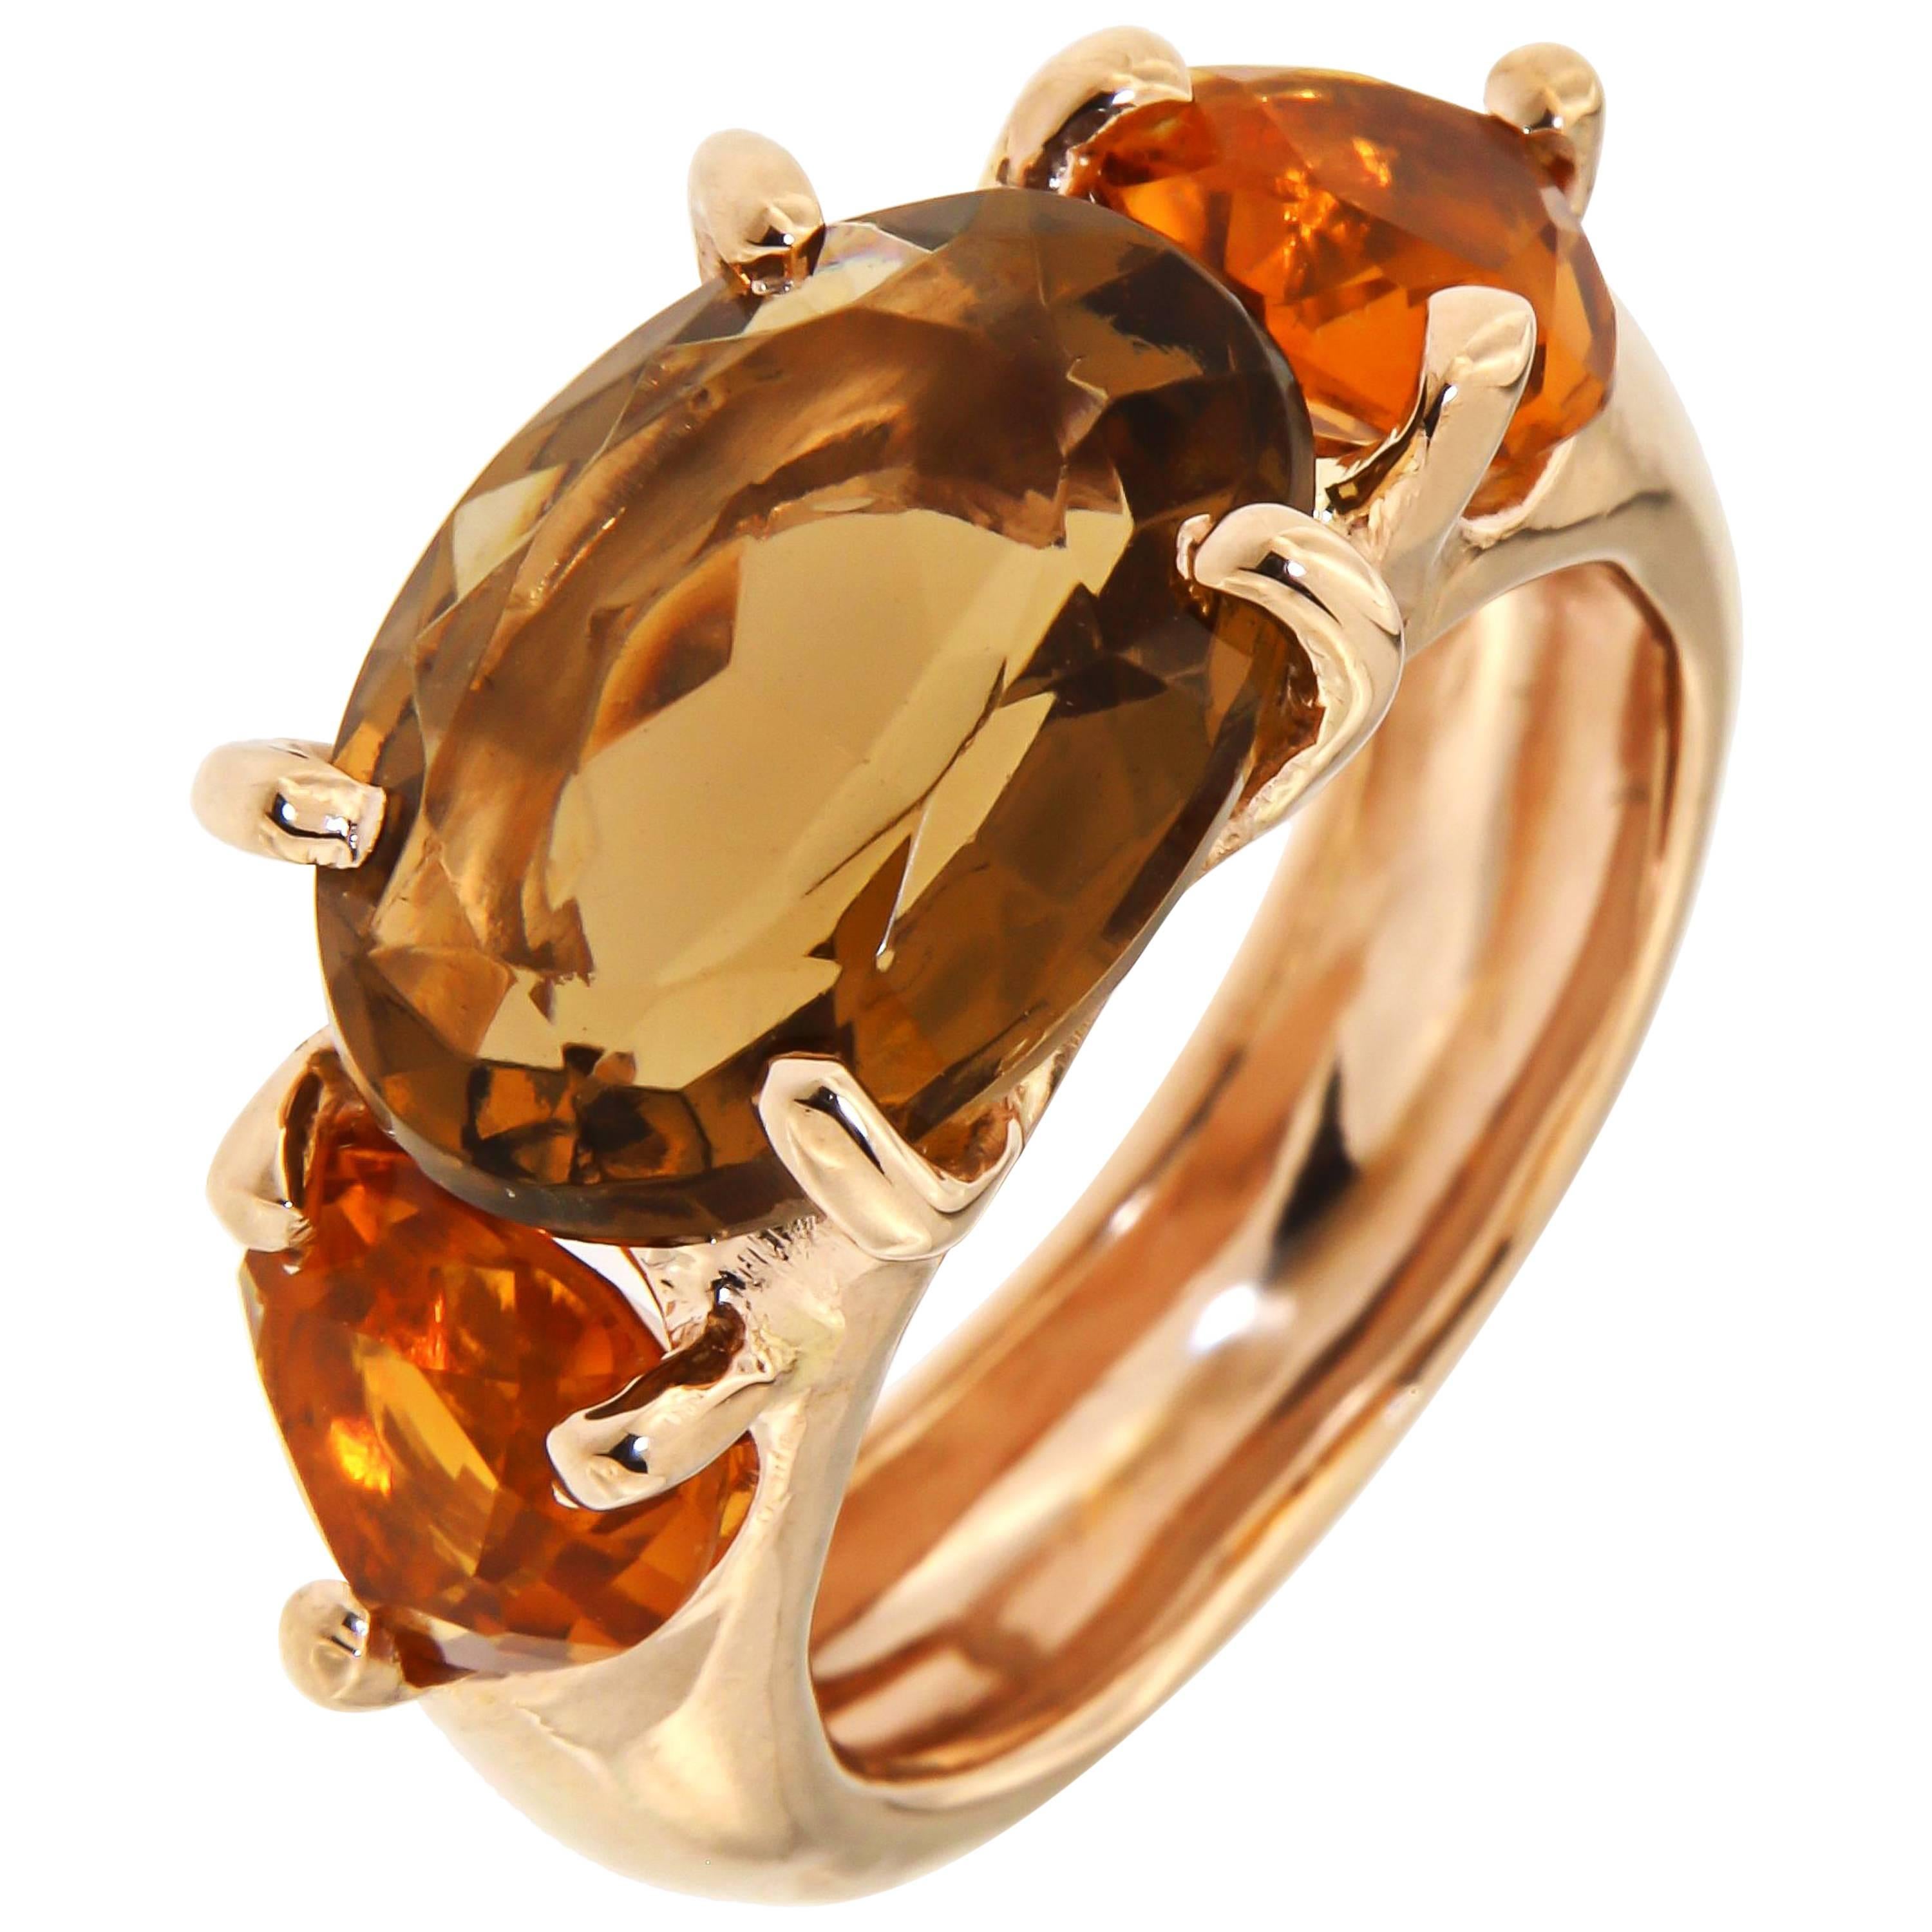 Rose Gold Orange Citrine Ring Handcrafted in Italy by Botta gioielli